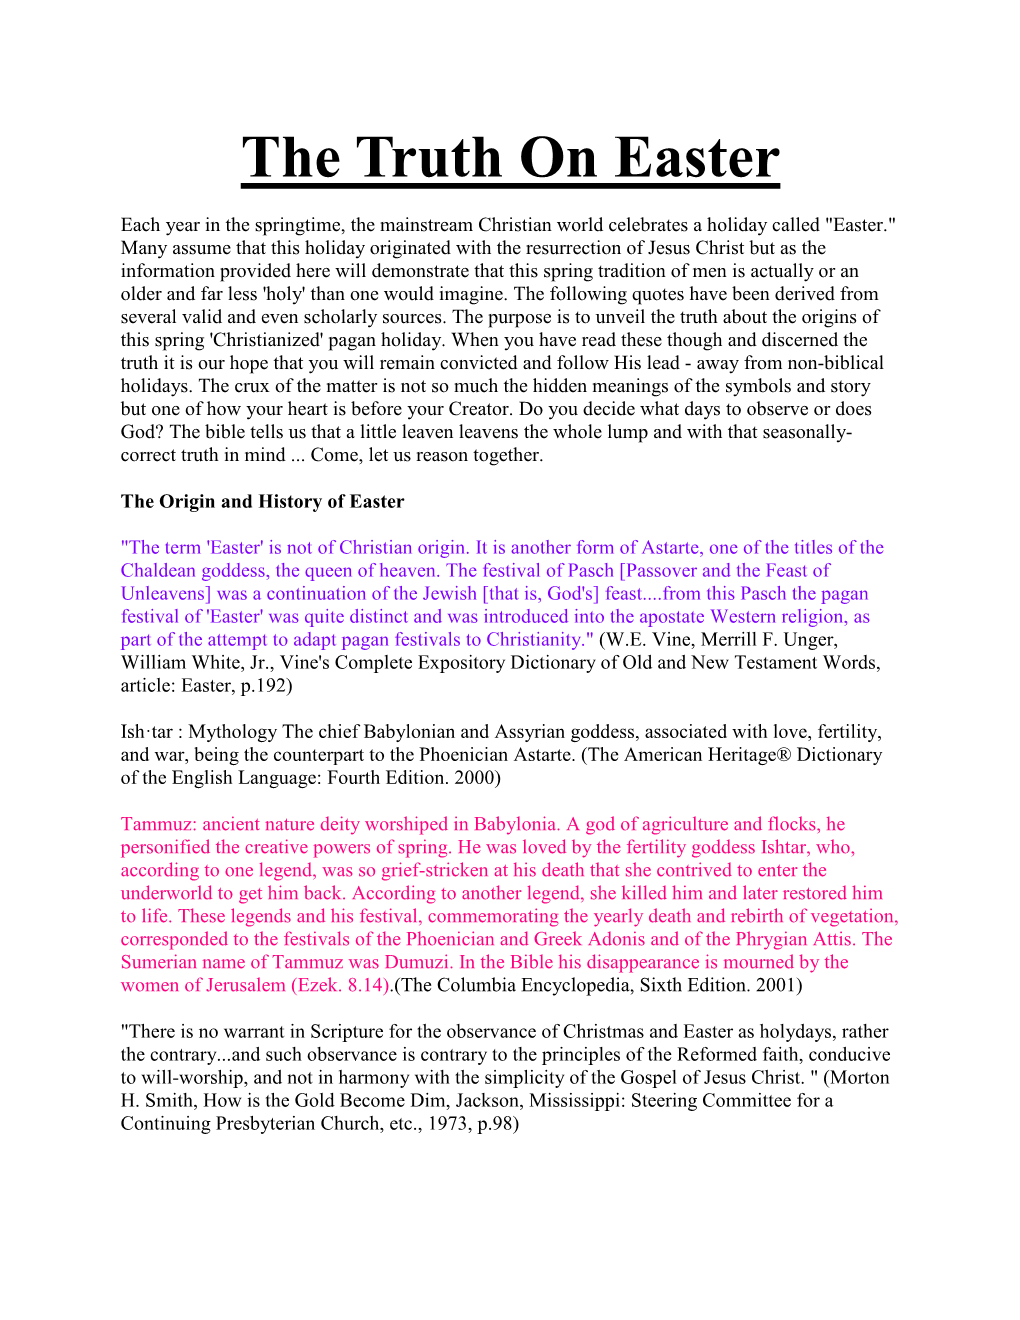 The Truth on Easter